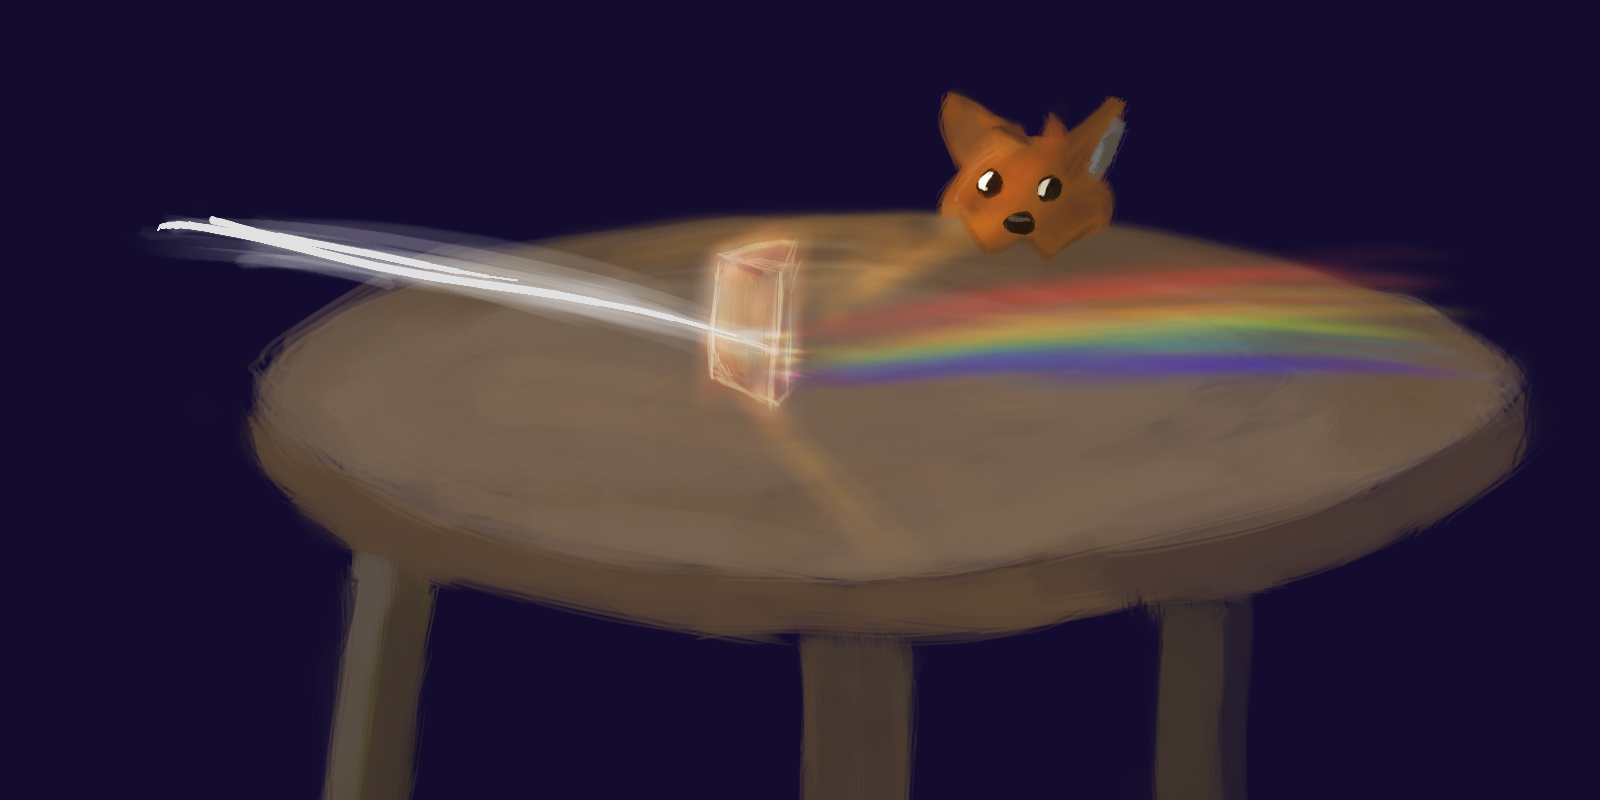 A digital painting of a blob-like fox holding onto a table and observing light passing through a prism